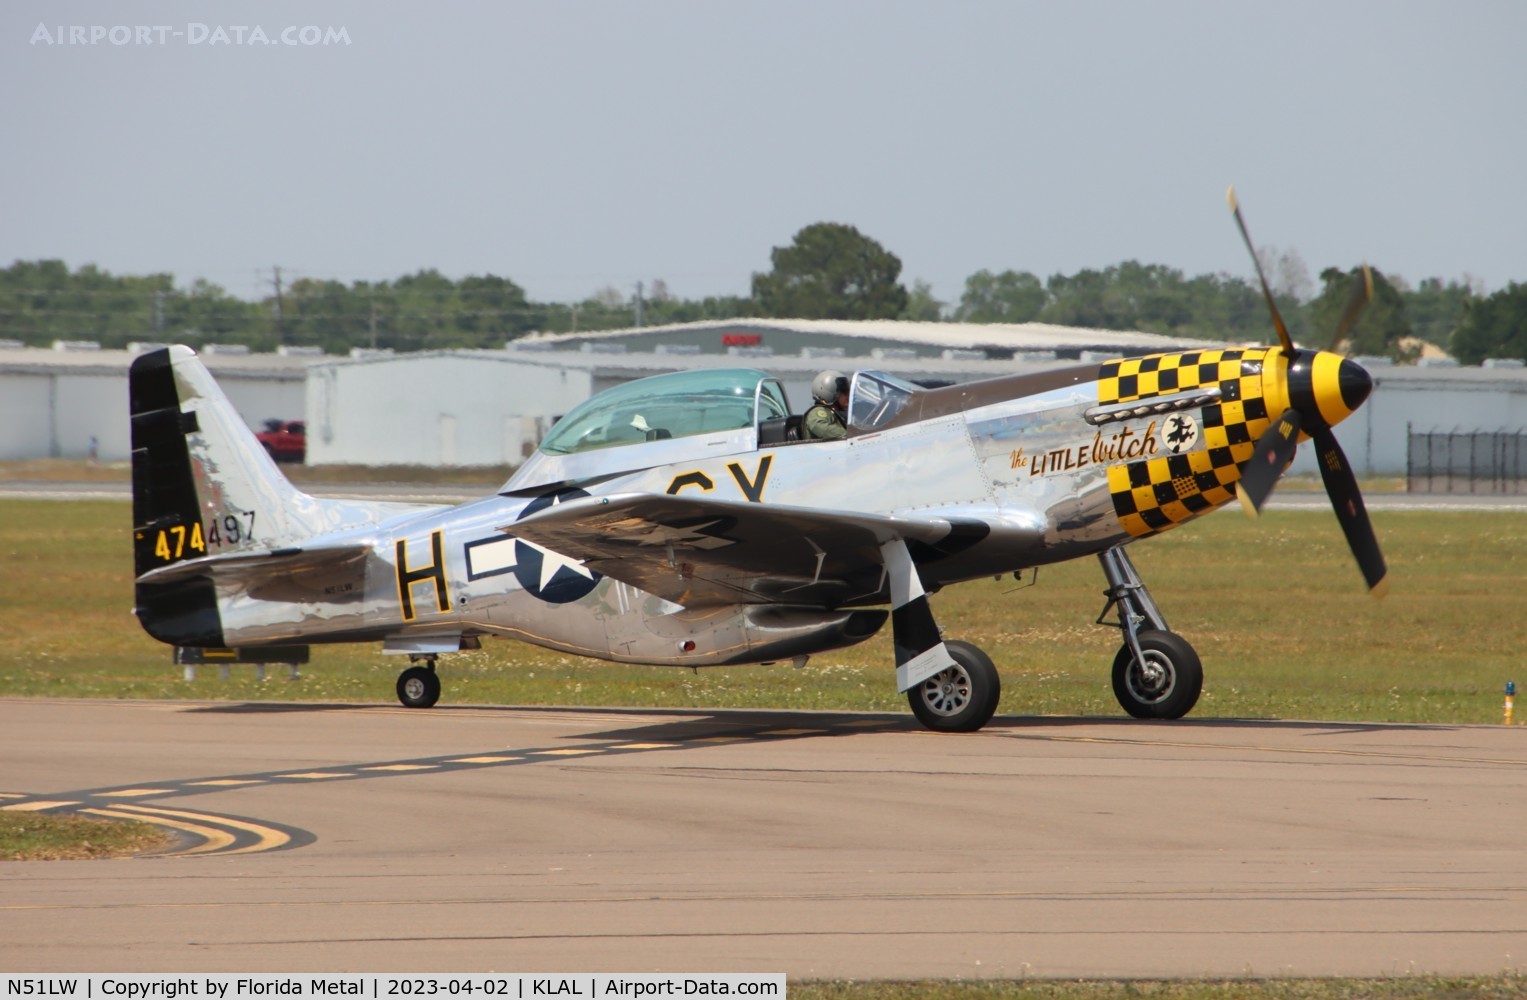 N51LW, 1962 North American P-51D Mustang C/N 122-41037, Little Witch zx